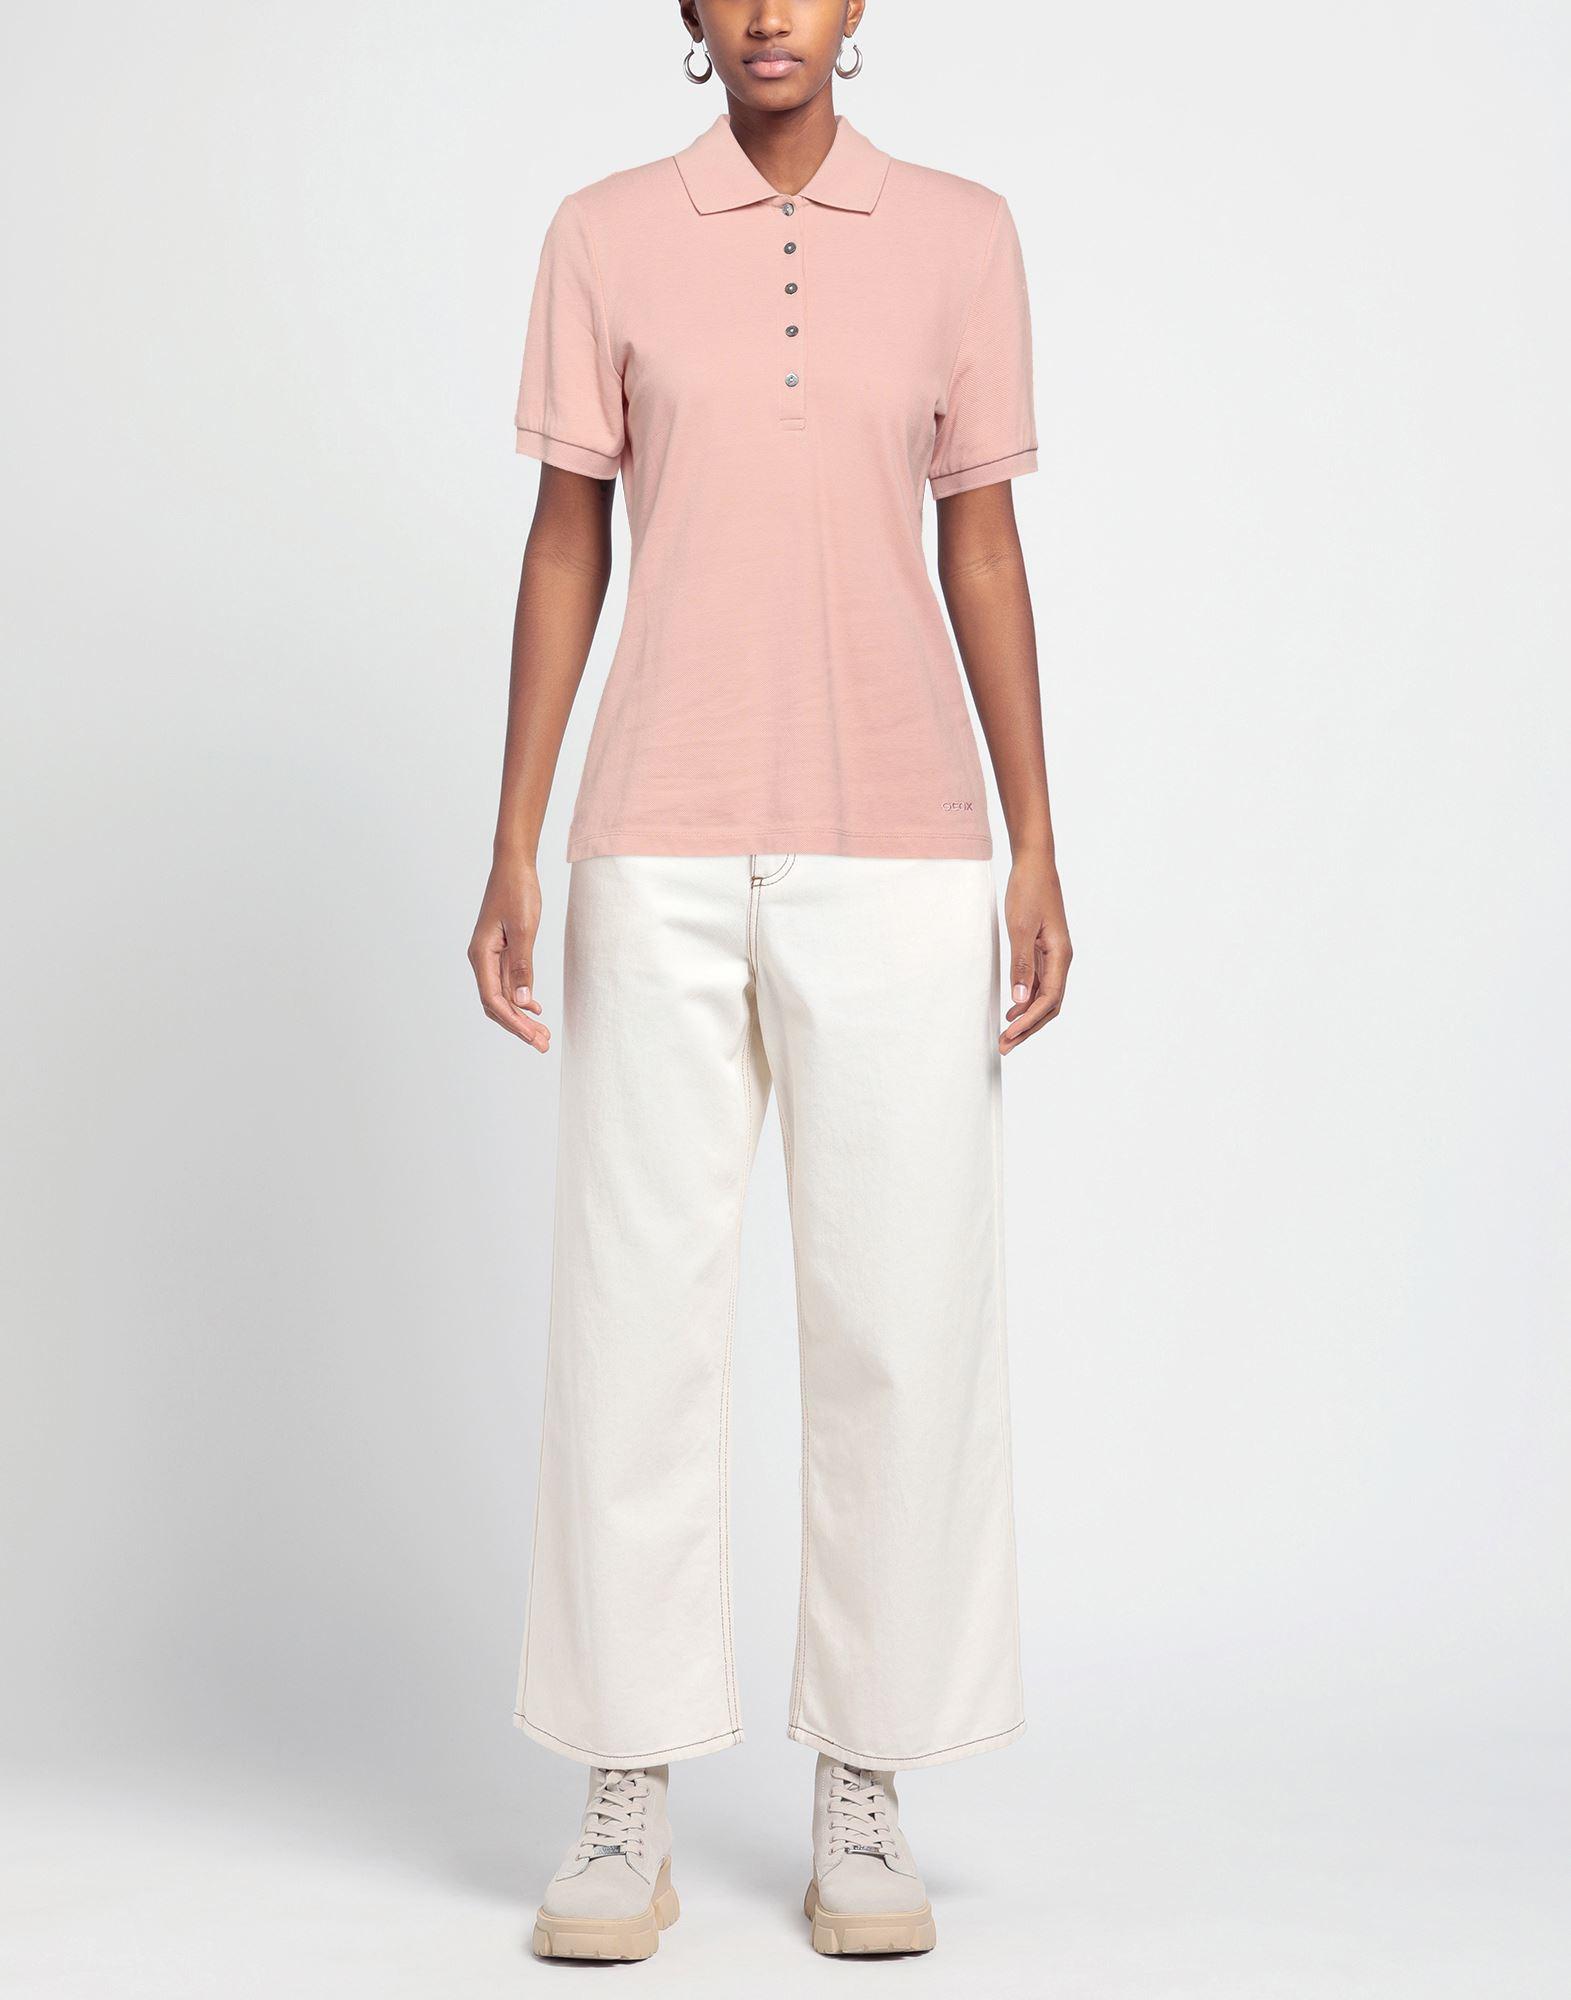 Geox Polo Shirt in Pink | Lyst